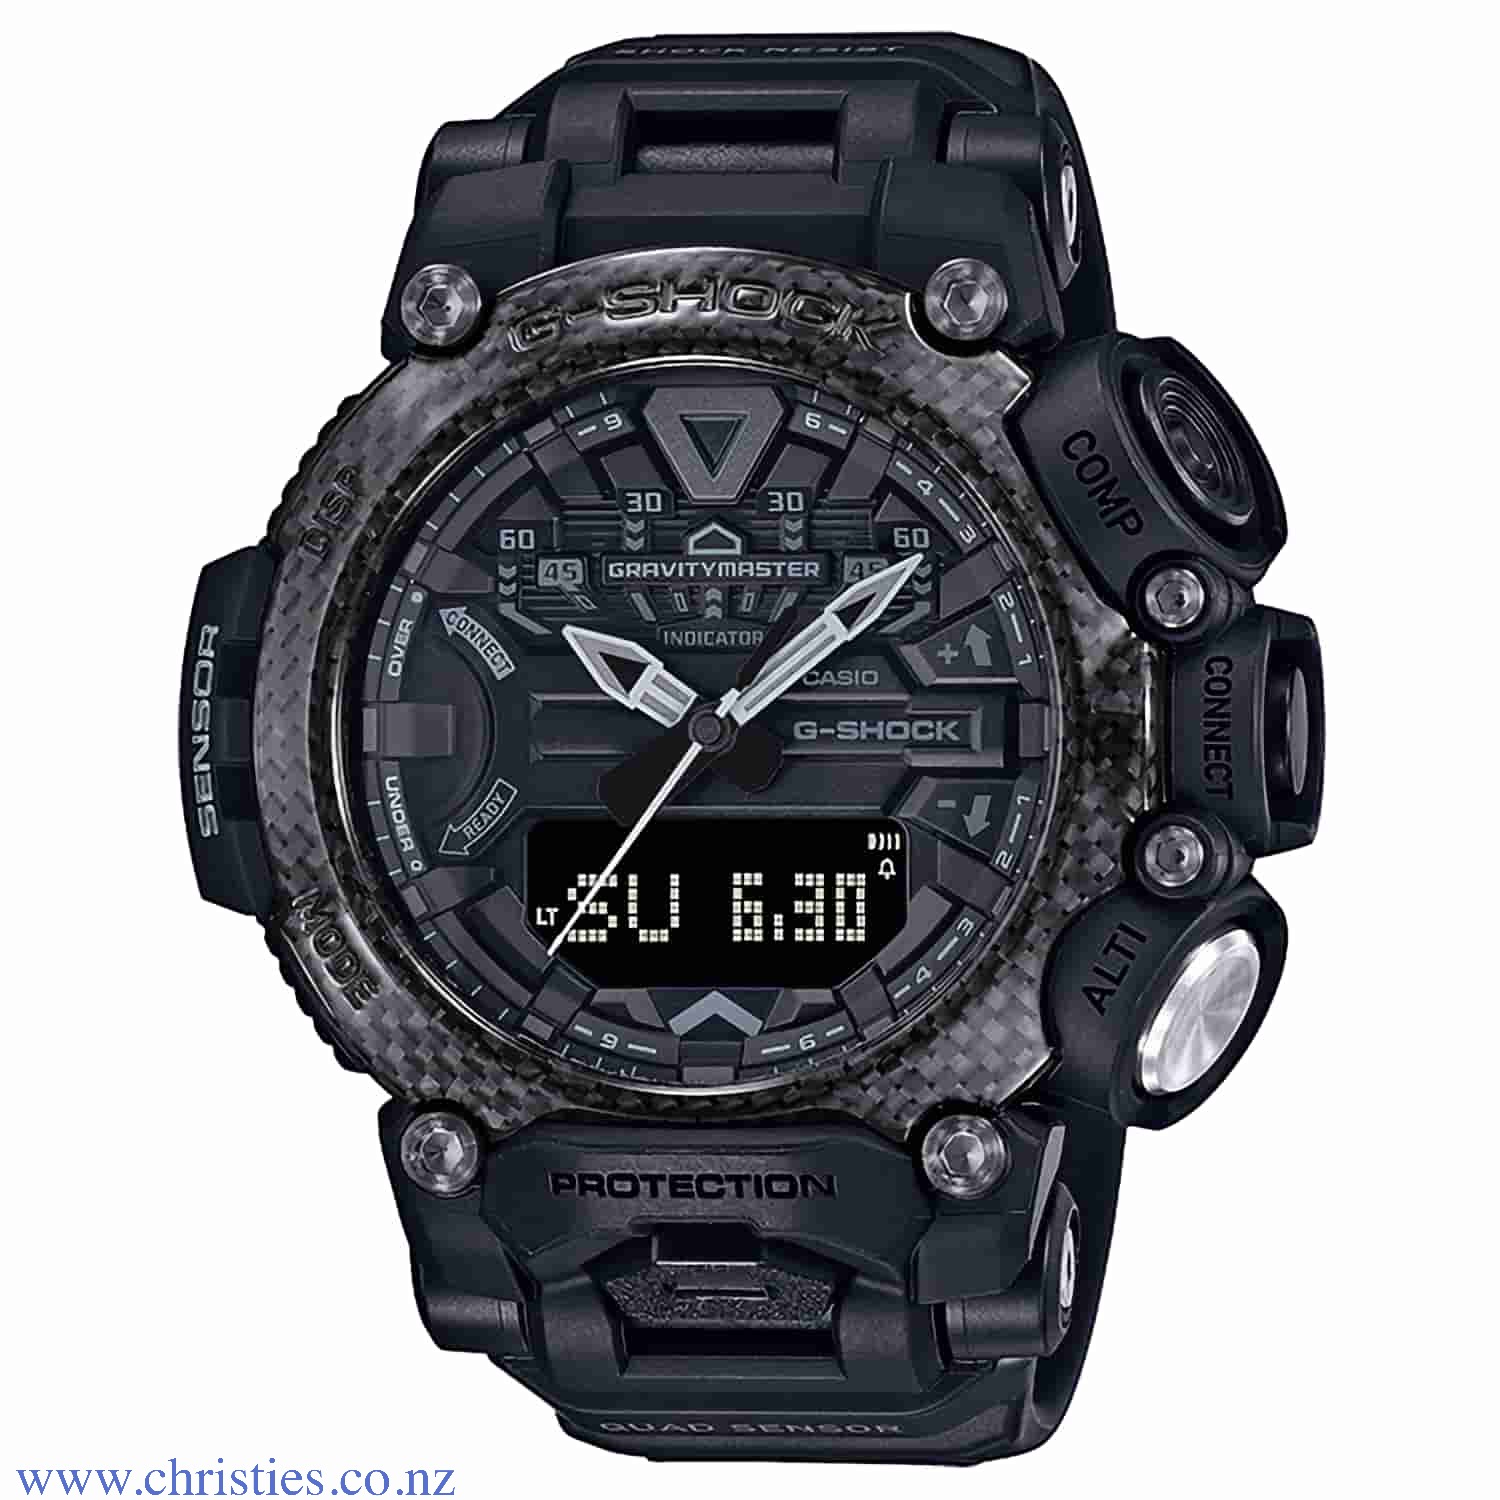 GRB200-1B Casio G-Shock Gravitymaster  Watch. Start with strong, lightweight carbon fibre, then add rugged style in a handsome black and grey colour scheme. Now you’re ready for anything.  Designed for pros working in tough environments, MASTER of G speci